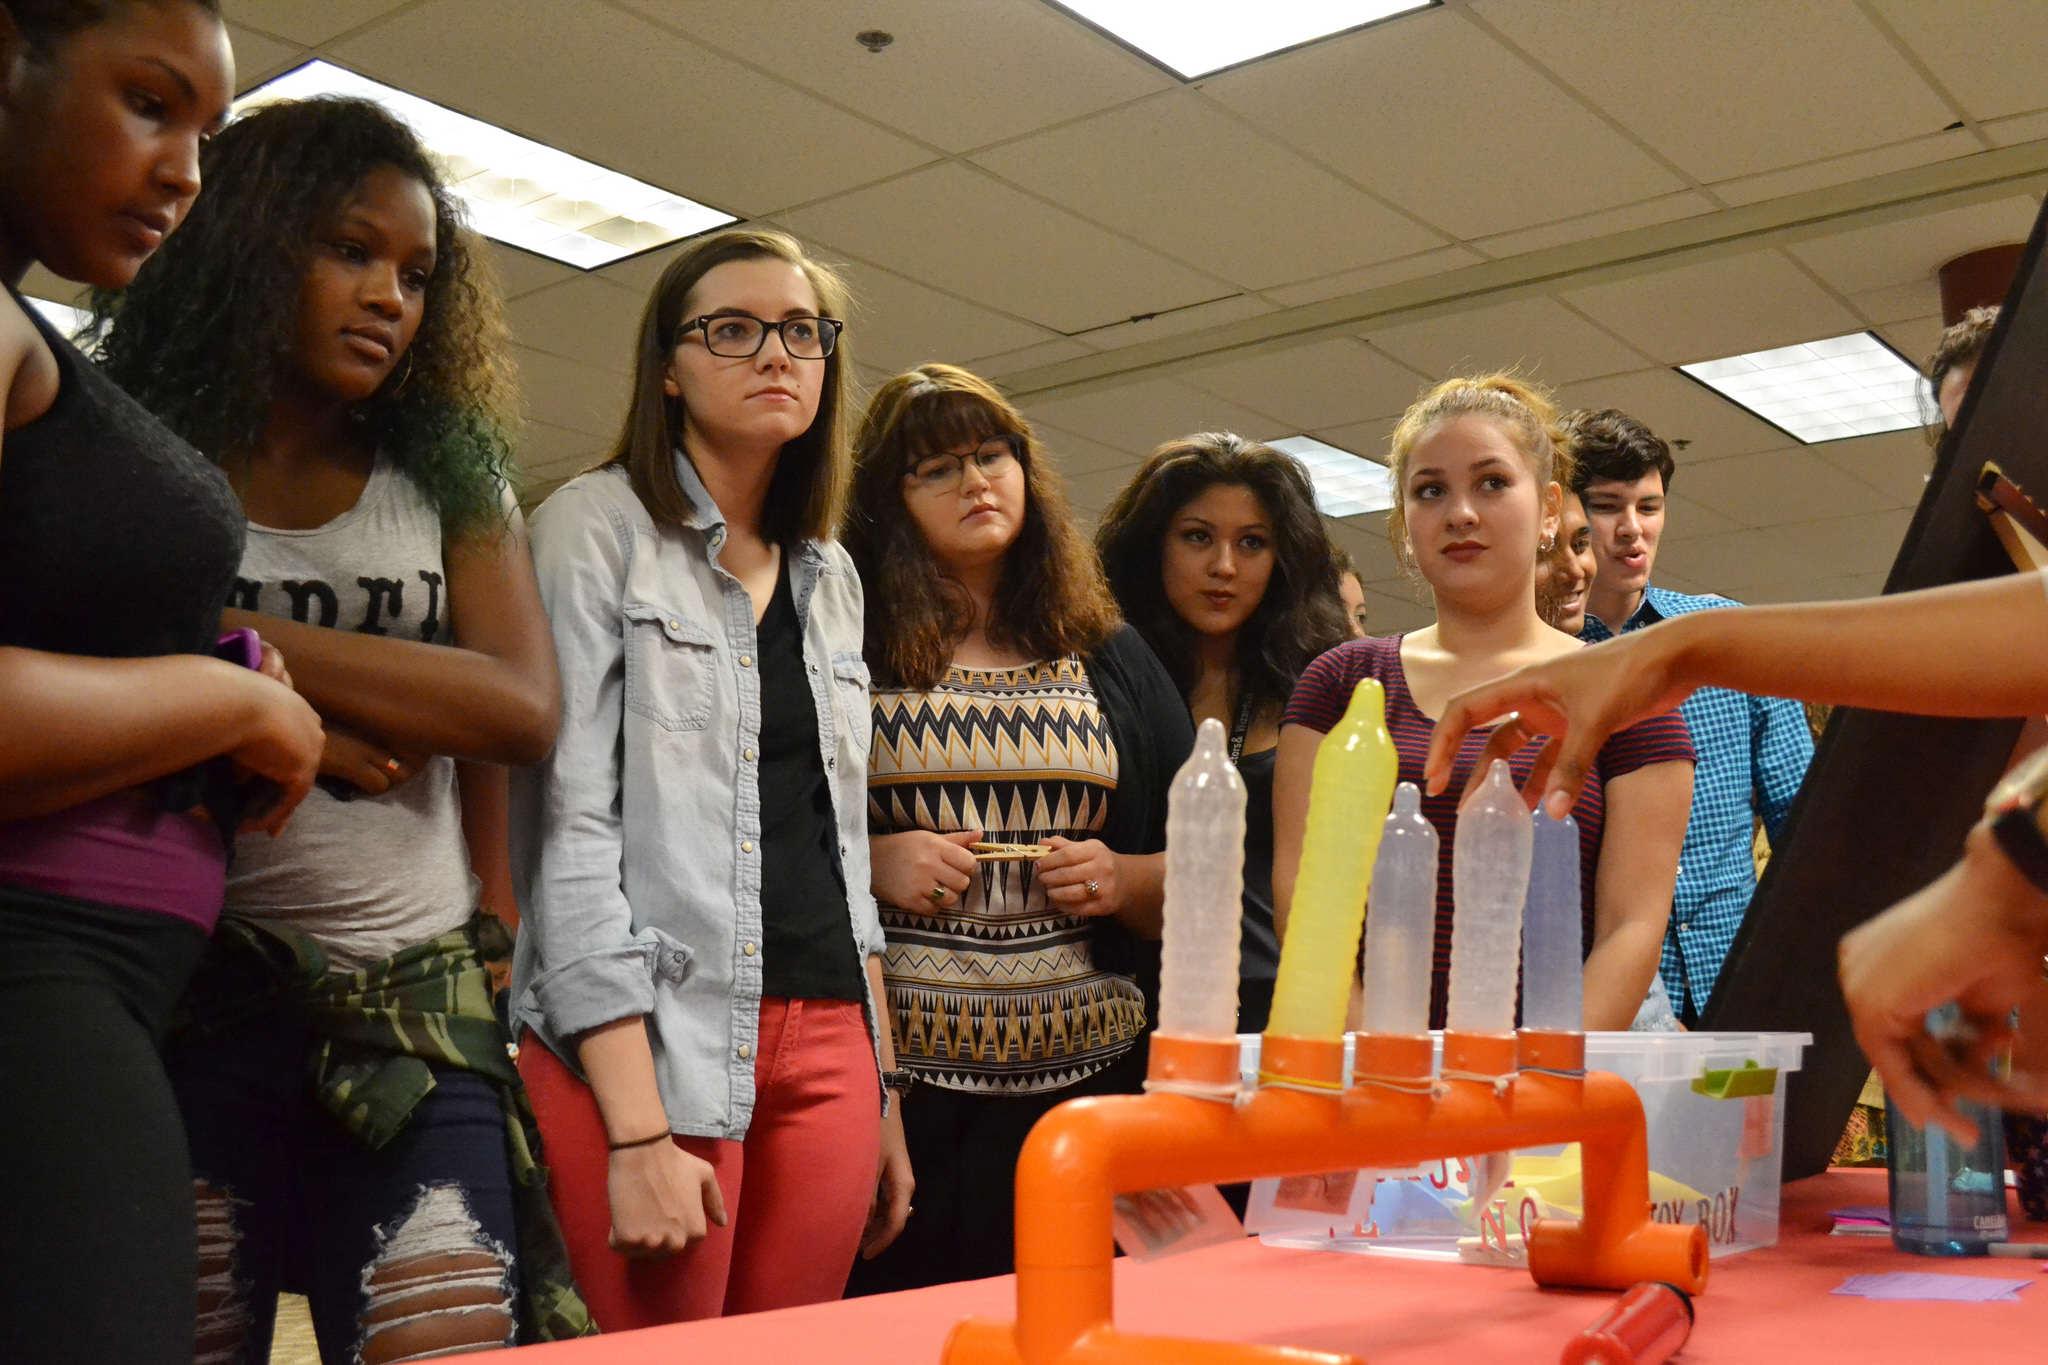 Thursday, Sept. 25, 2014, freshman check out a display showing various condom styles and shapes at the Residential Life Sexpo, an event held by dorm the RAs to help educate incoming students on issues relating to sexuality.